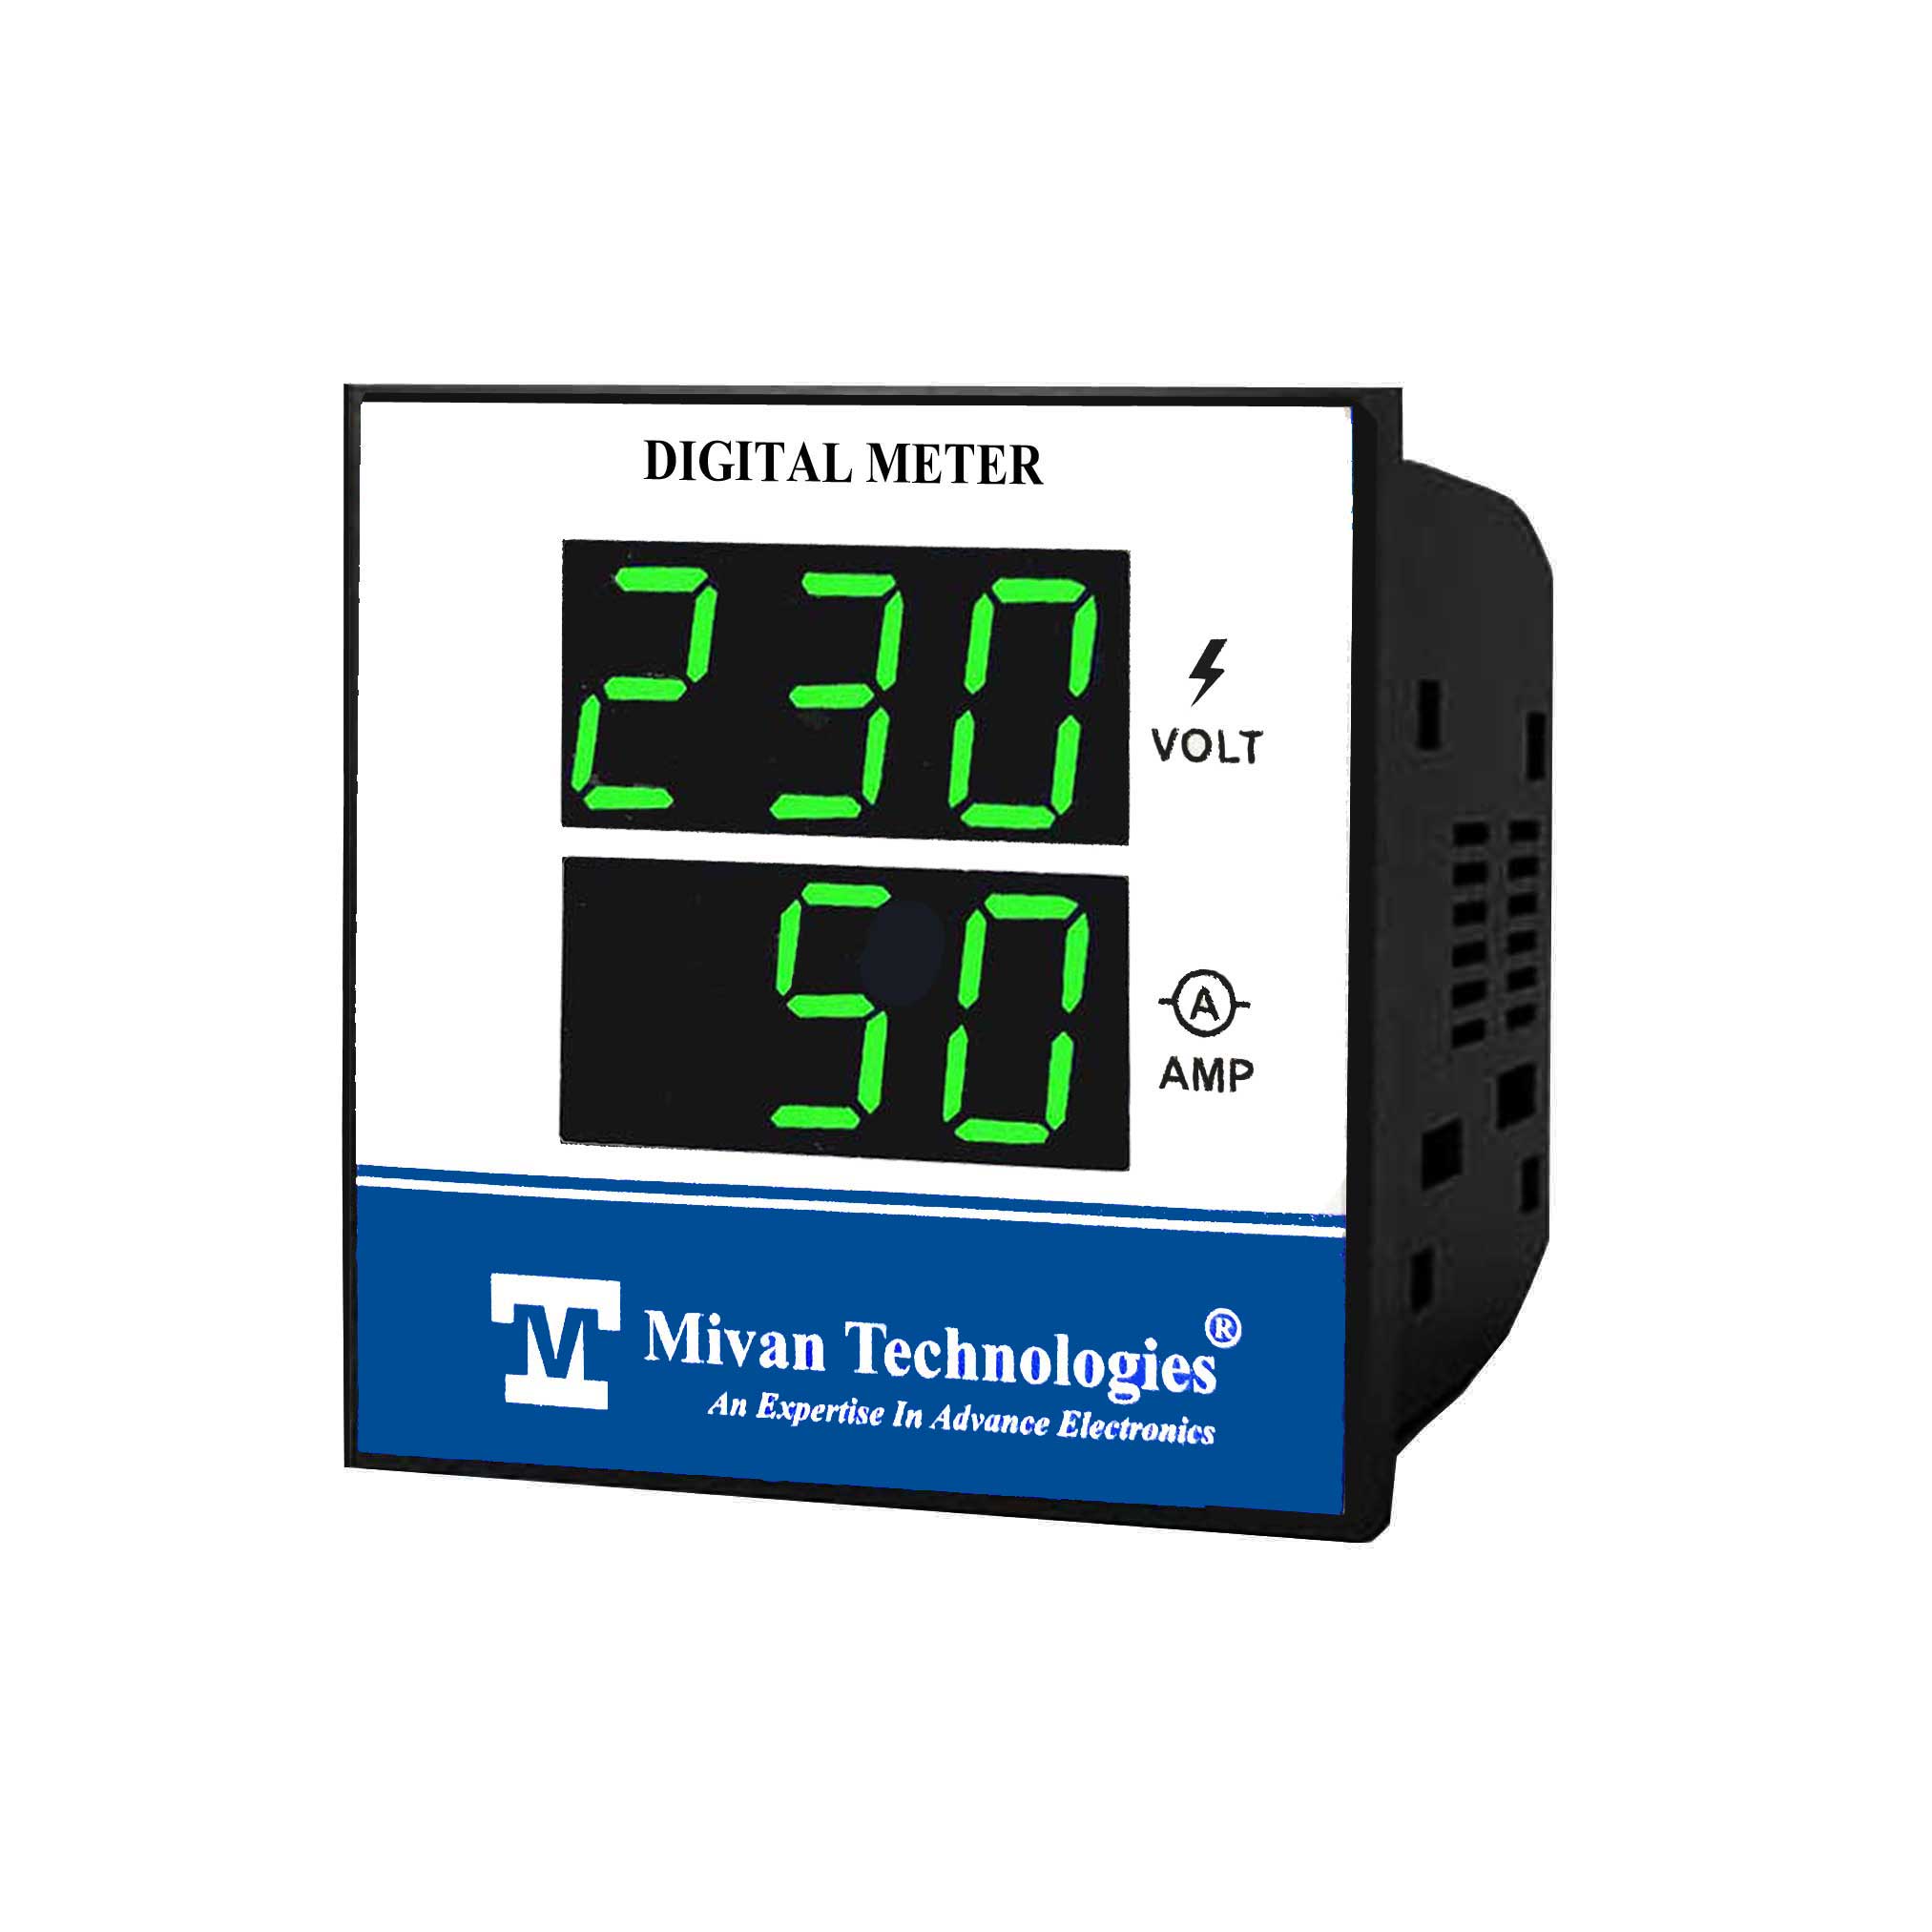 DVM 7212 single phase digital volt and ampere meter  with ct panel mounted sensing voltage up to 600 VAC